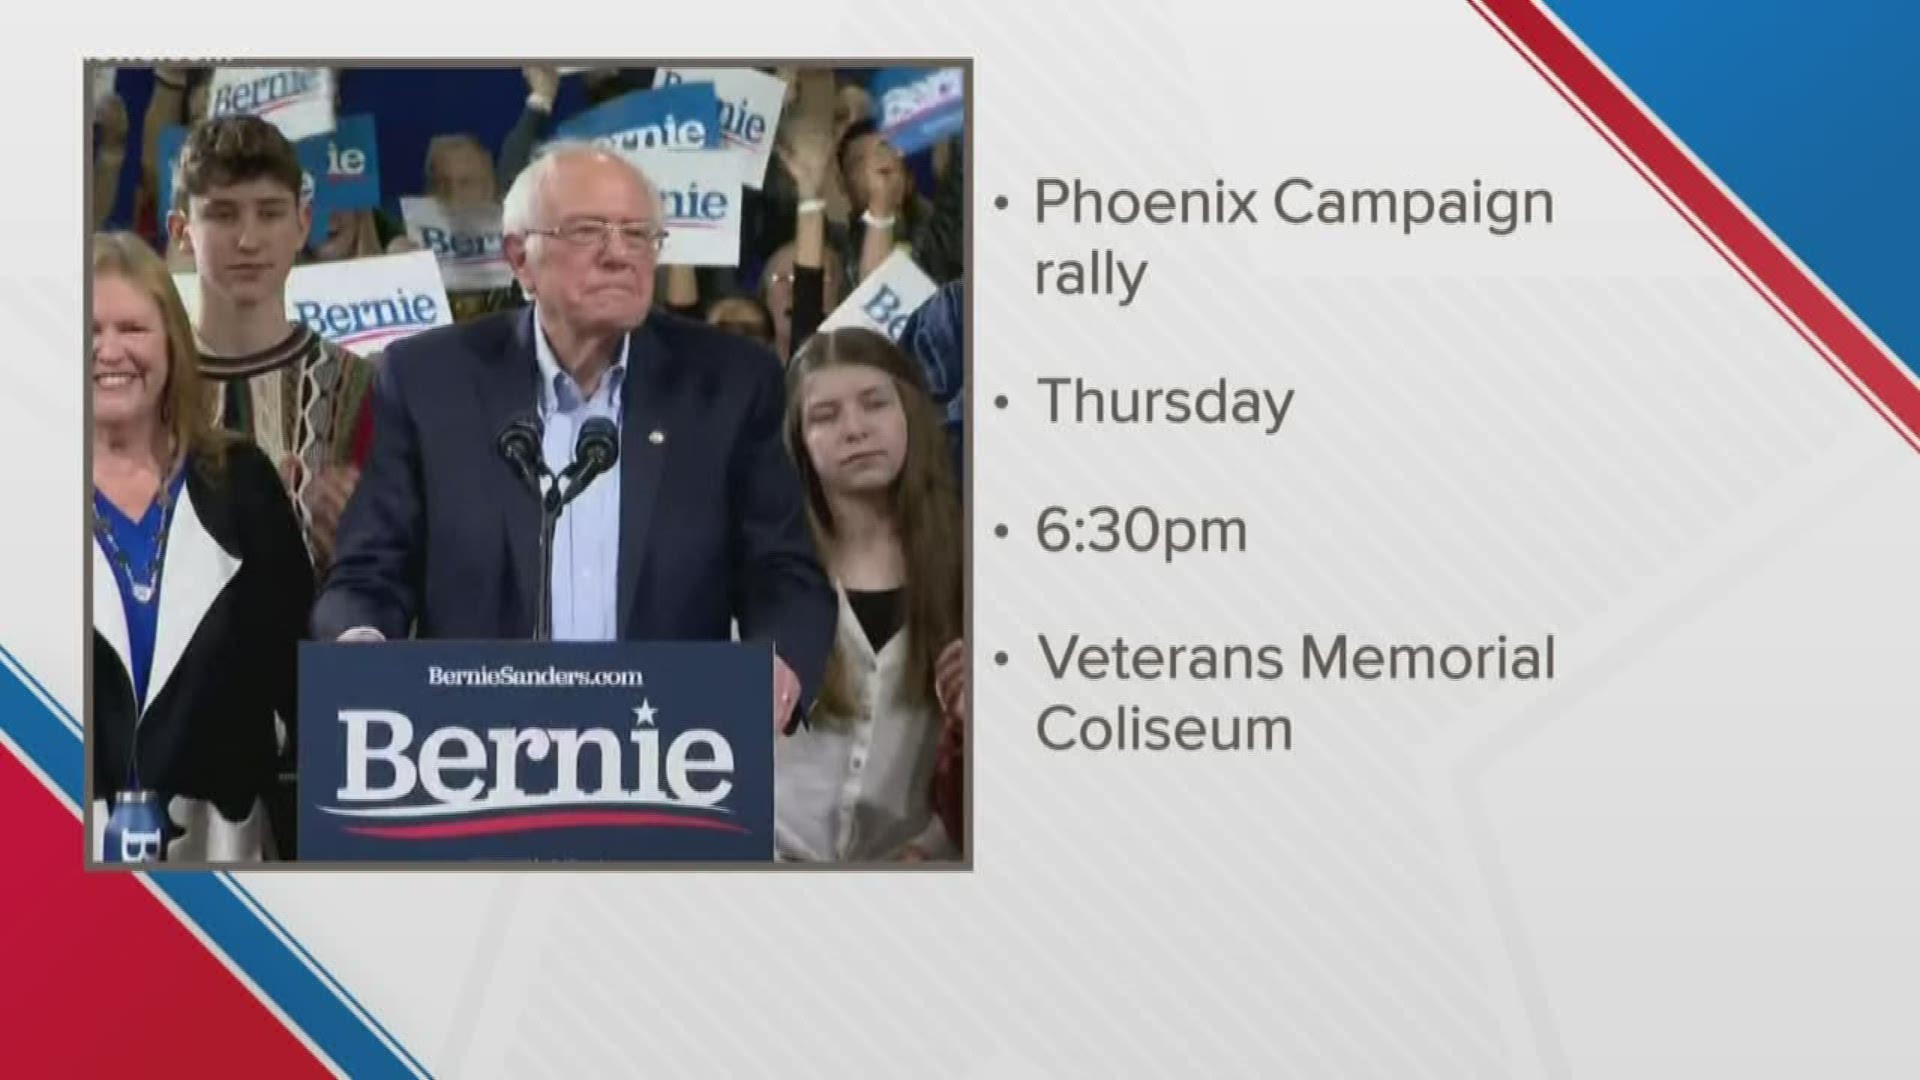 Bernie Sanders is coming to the Phoenix on Thursday and Elizabeth Warren is scheduled to come to Mesa on Saturday. The Warren event is currently up in the air.